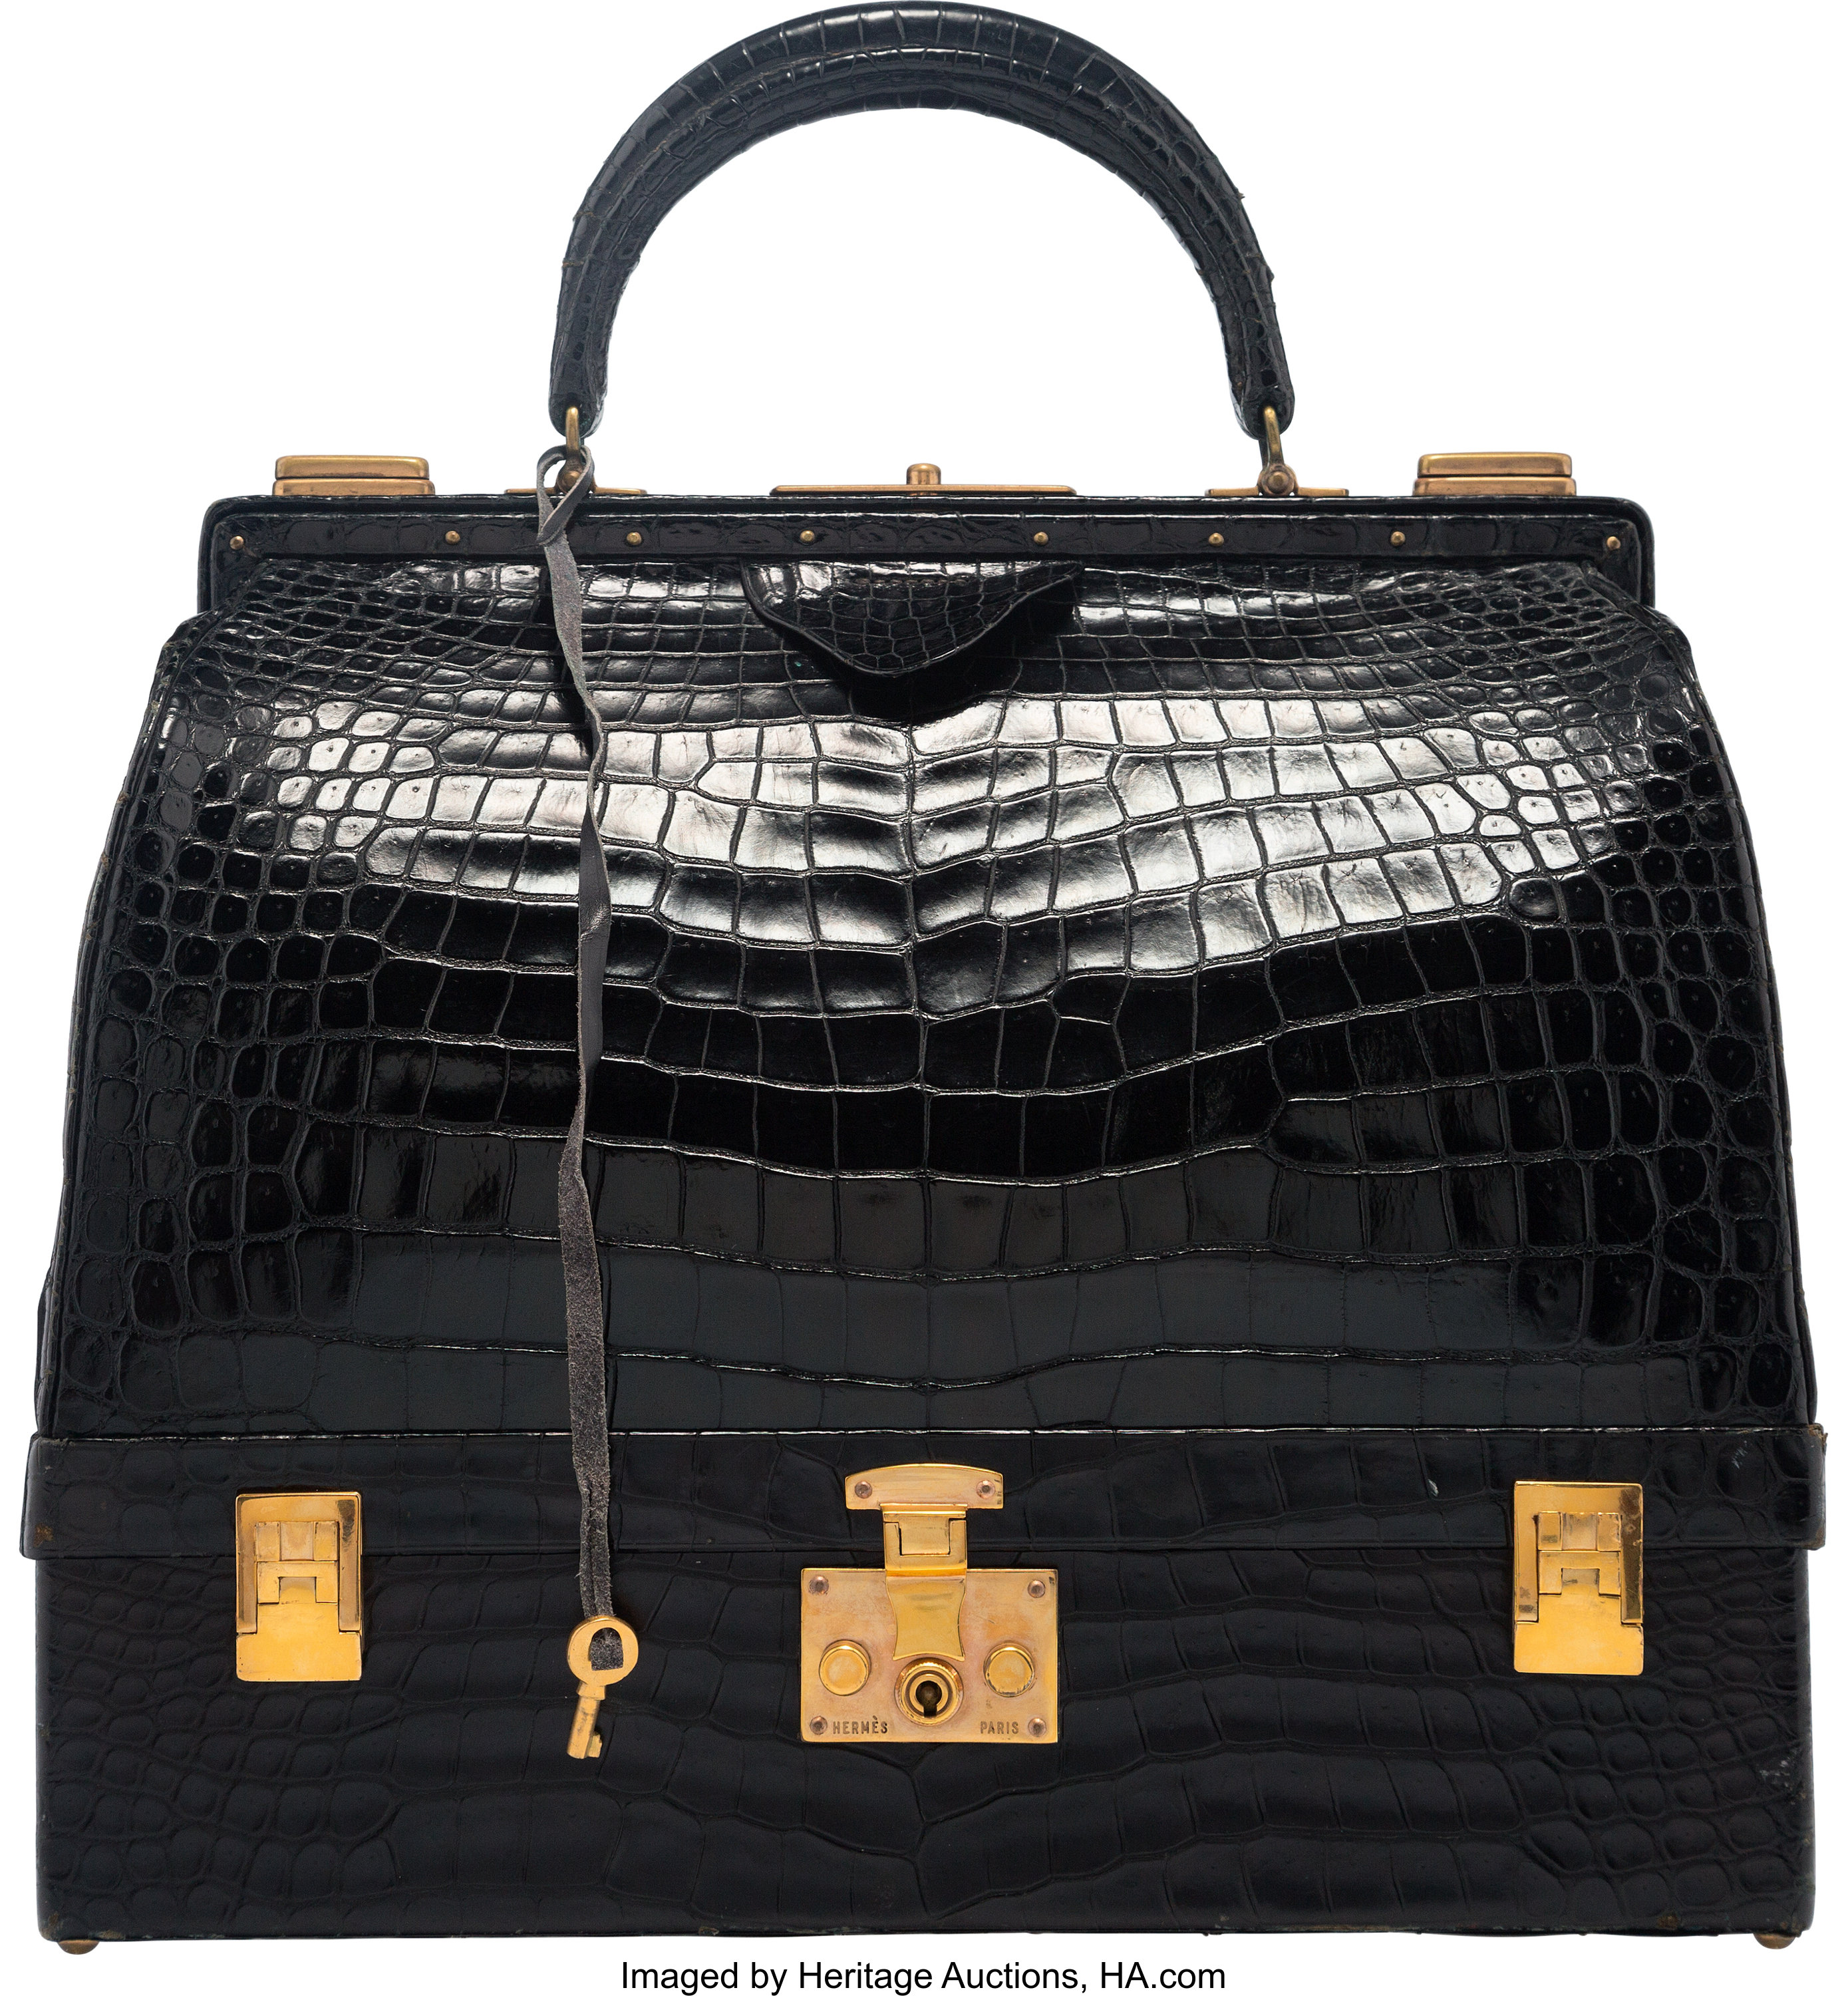 Hermès Vintage Black Shiny Crocodile Sac Mallette Gold Hardware,  1950s-1960s Available For Immediate Sale At Sotheby's